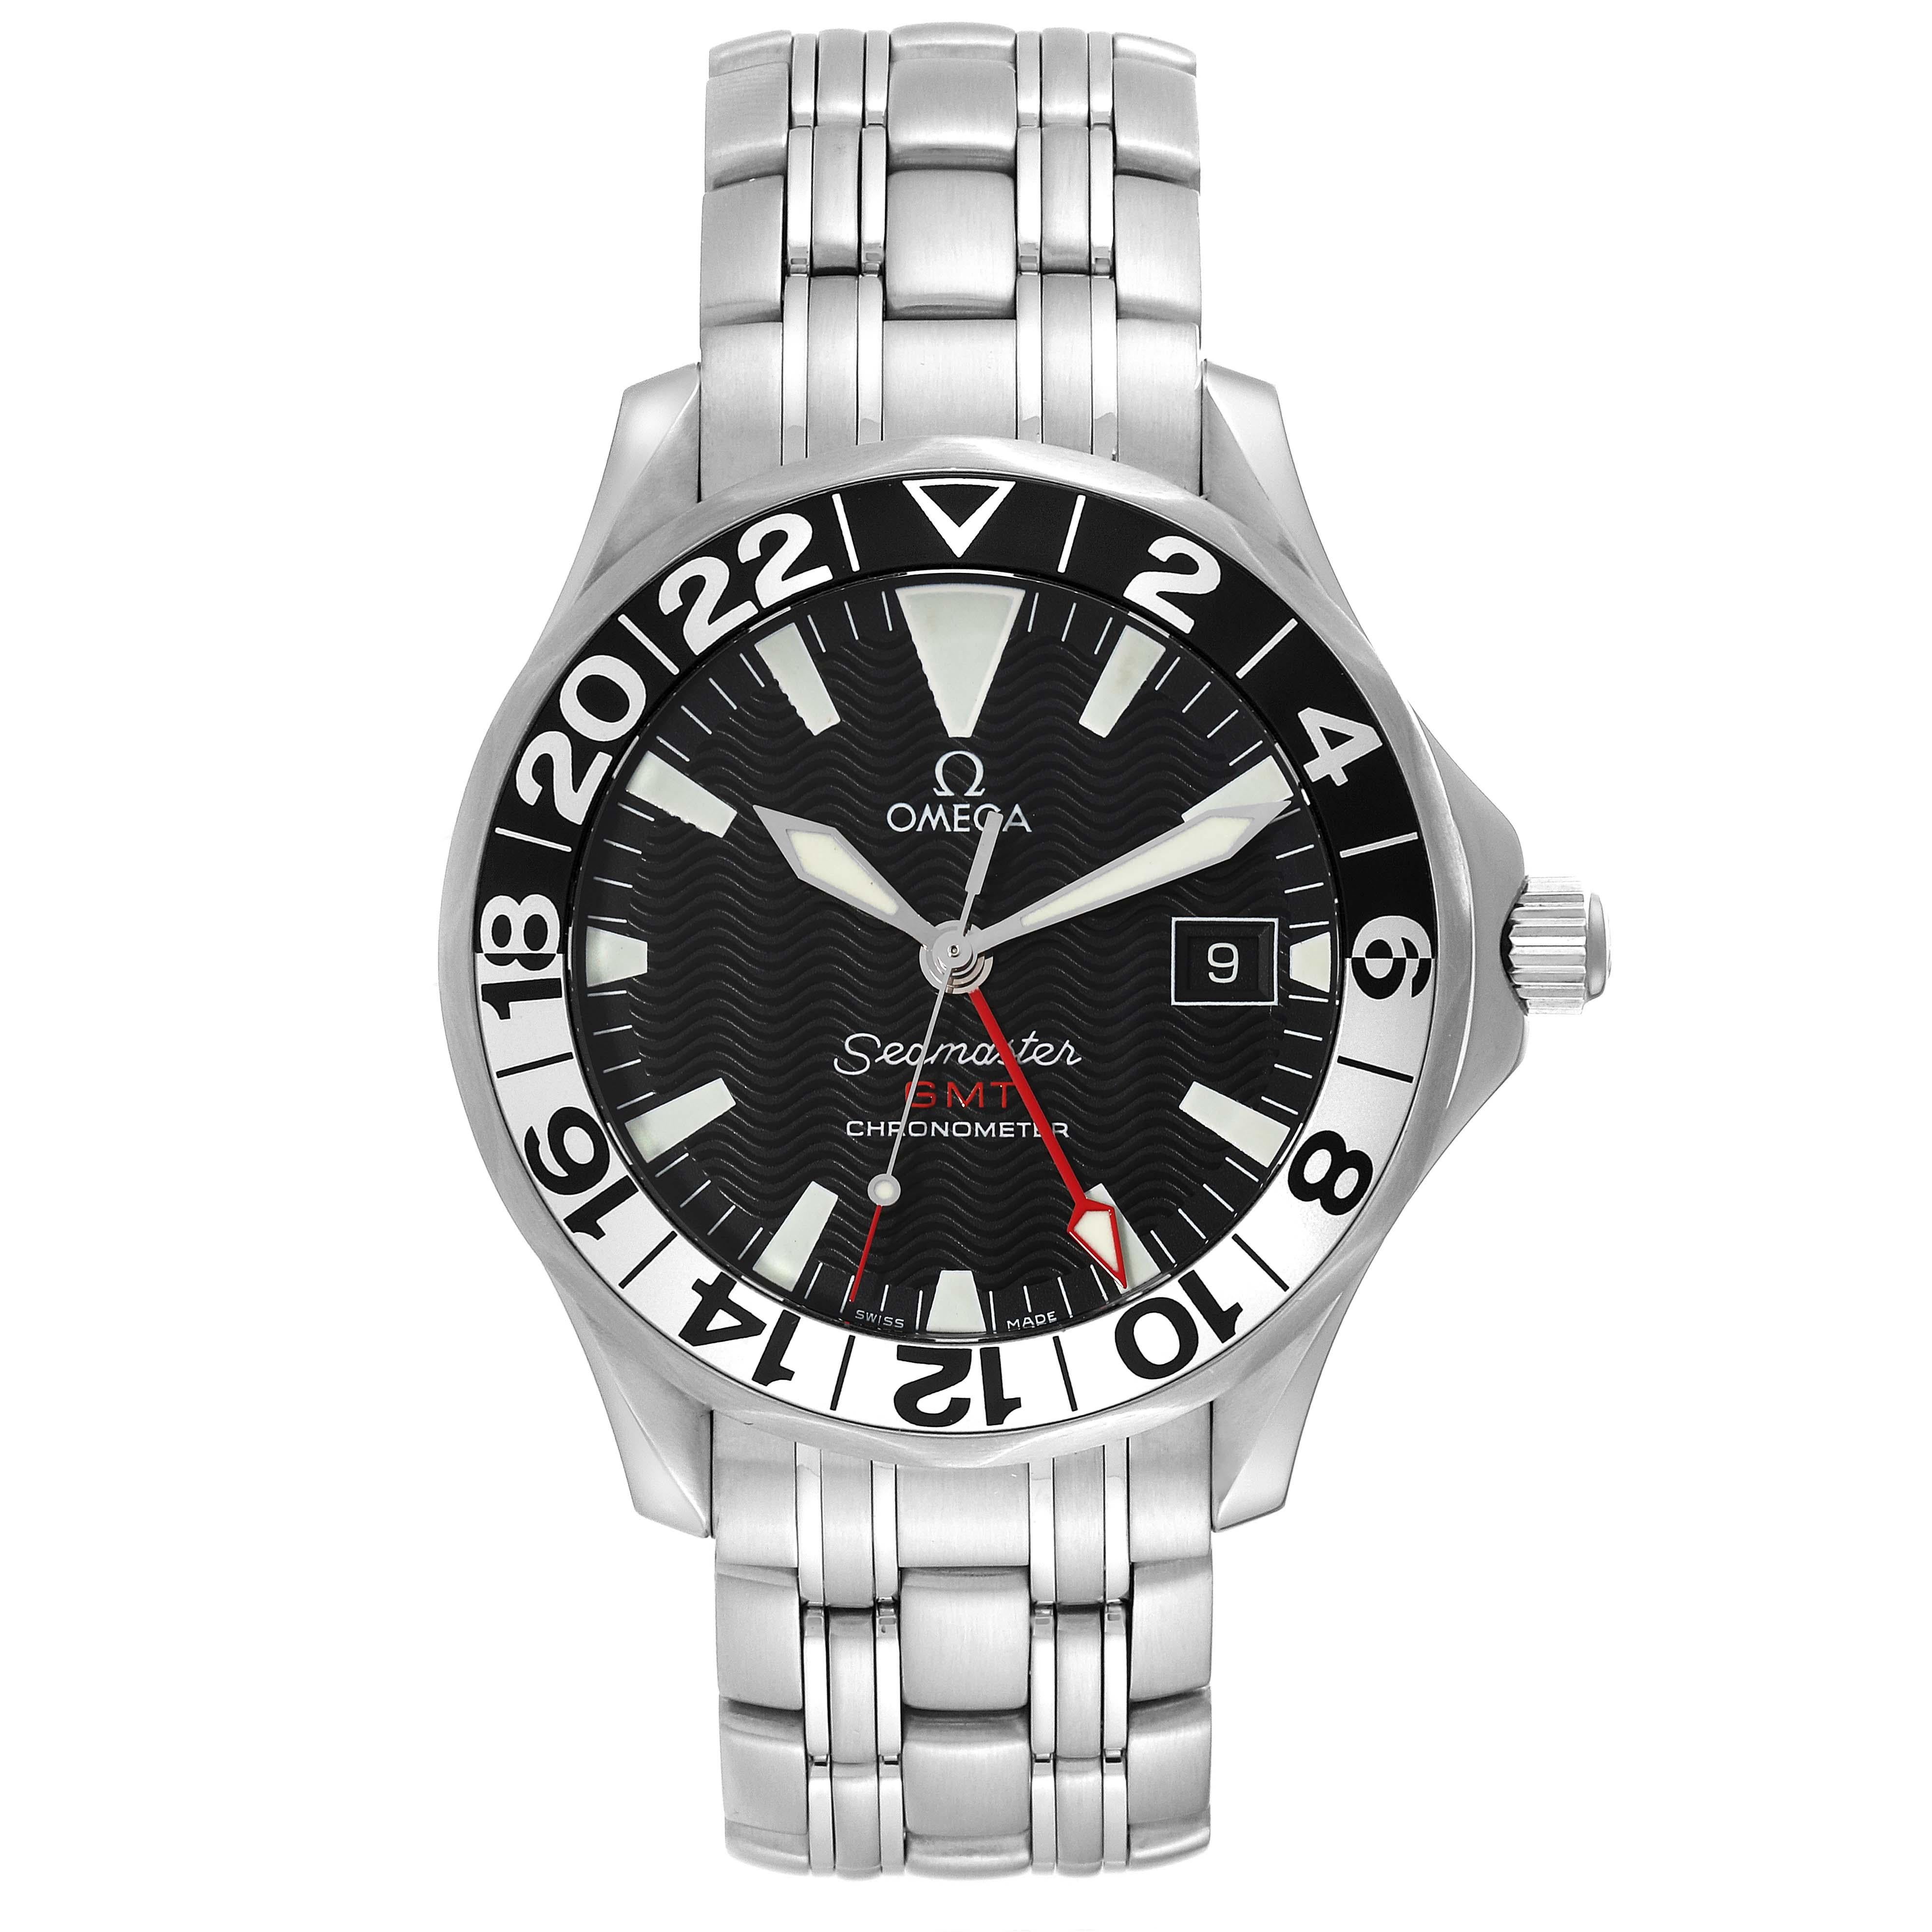 Omega Seamaster GMT 50th Anniversary Steel Mens Watch 2534.50.00 Card. Officially certified chronometer automatic self-winding movement. Brushed and polished stainless steel case 41 mm in diameter. Omega logo on the crown. Black and silver 24 hour